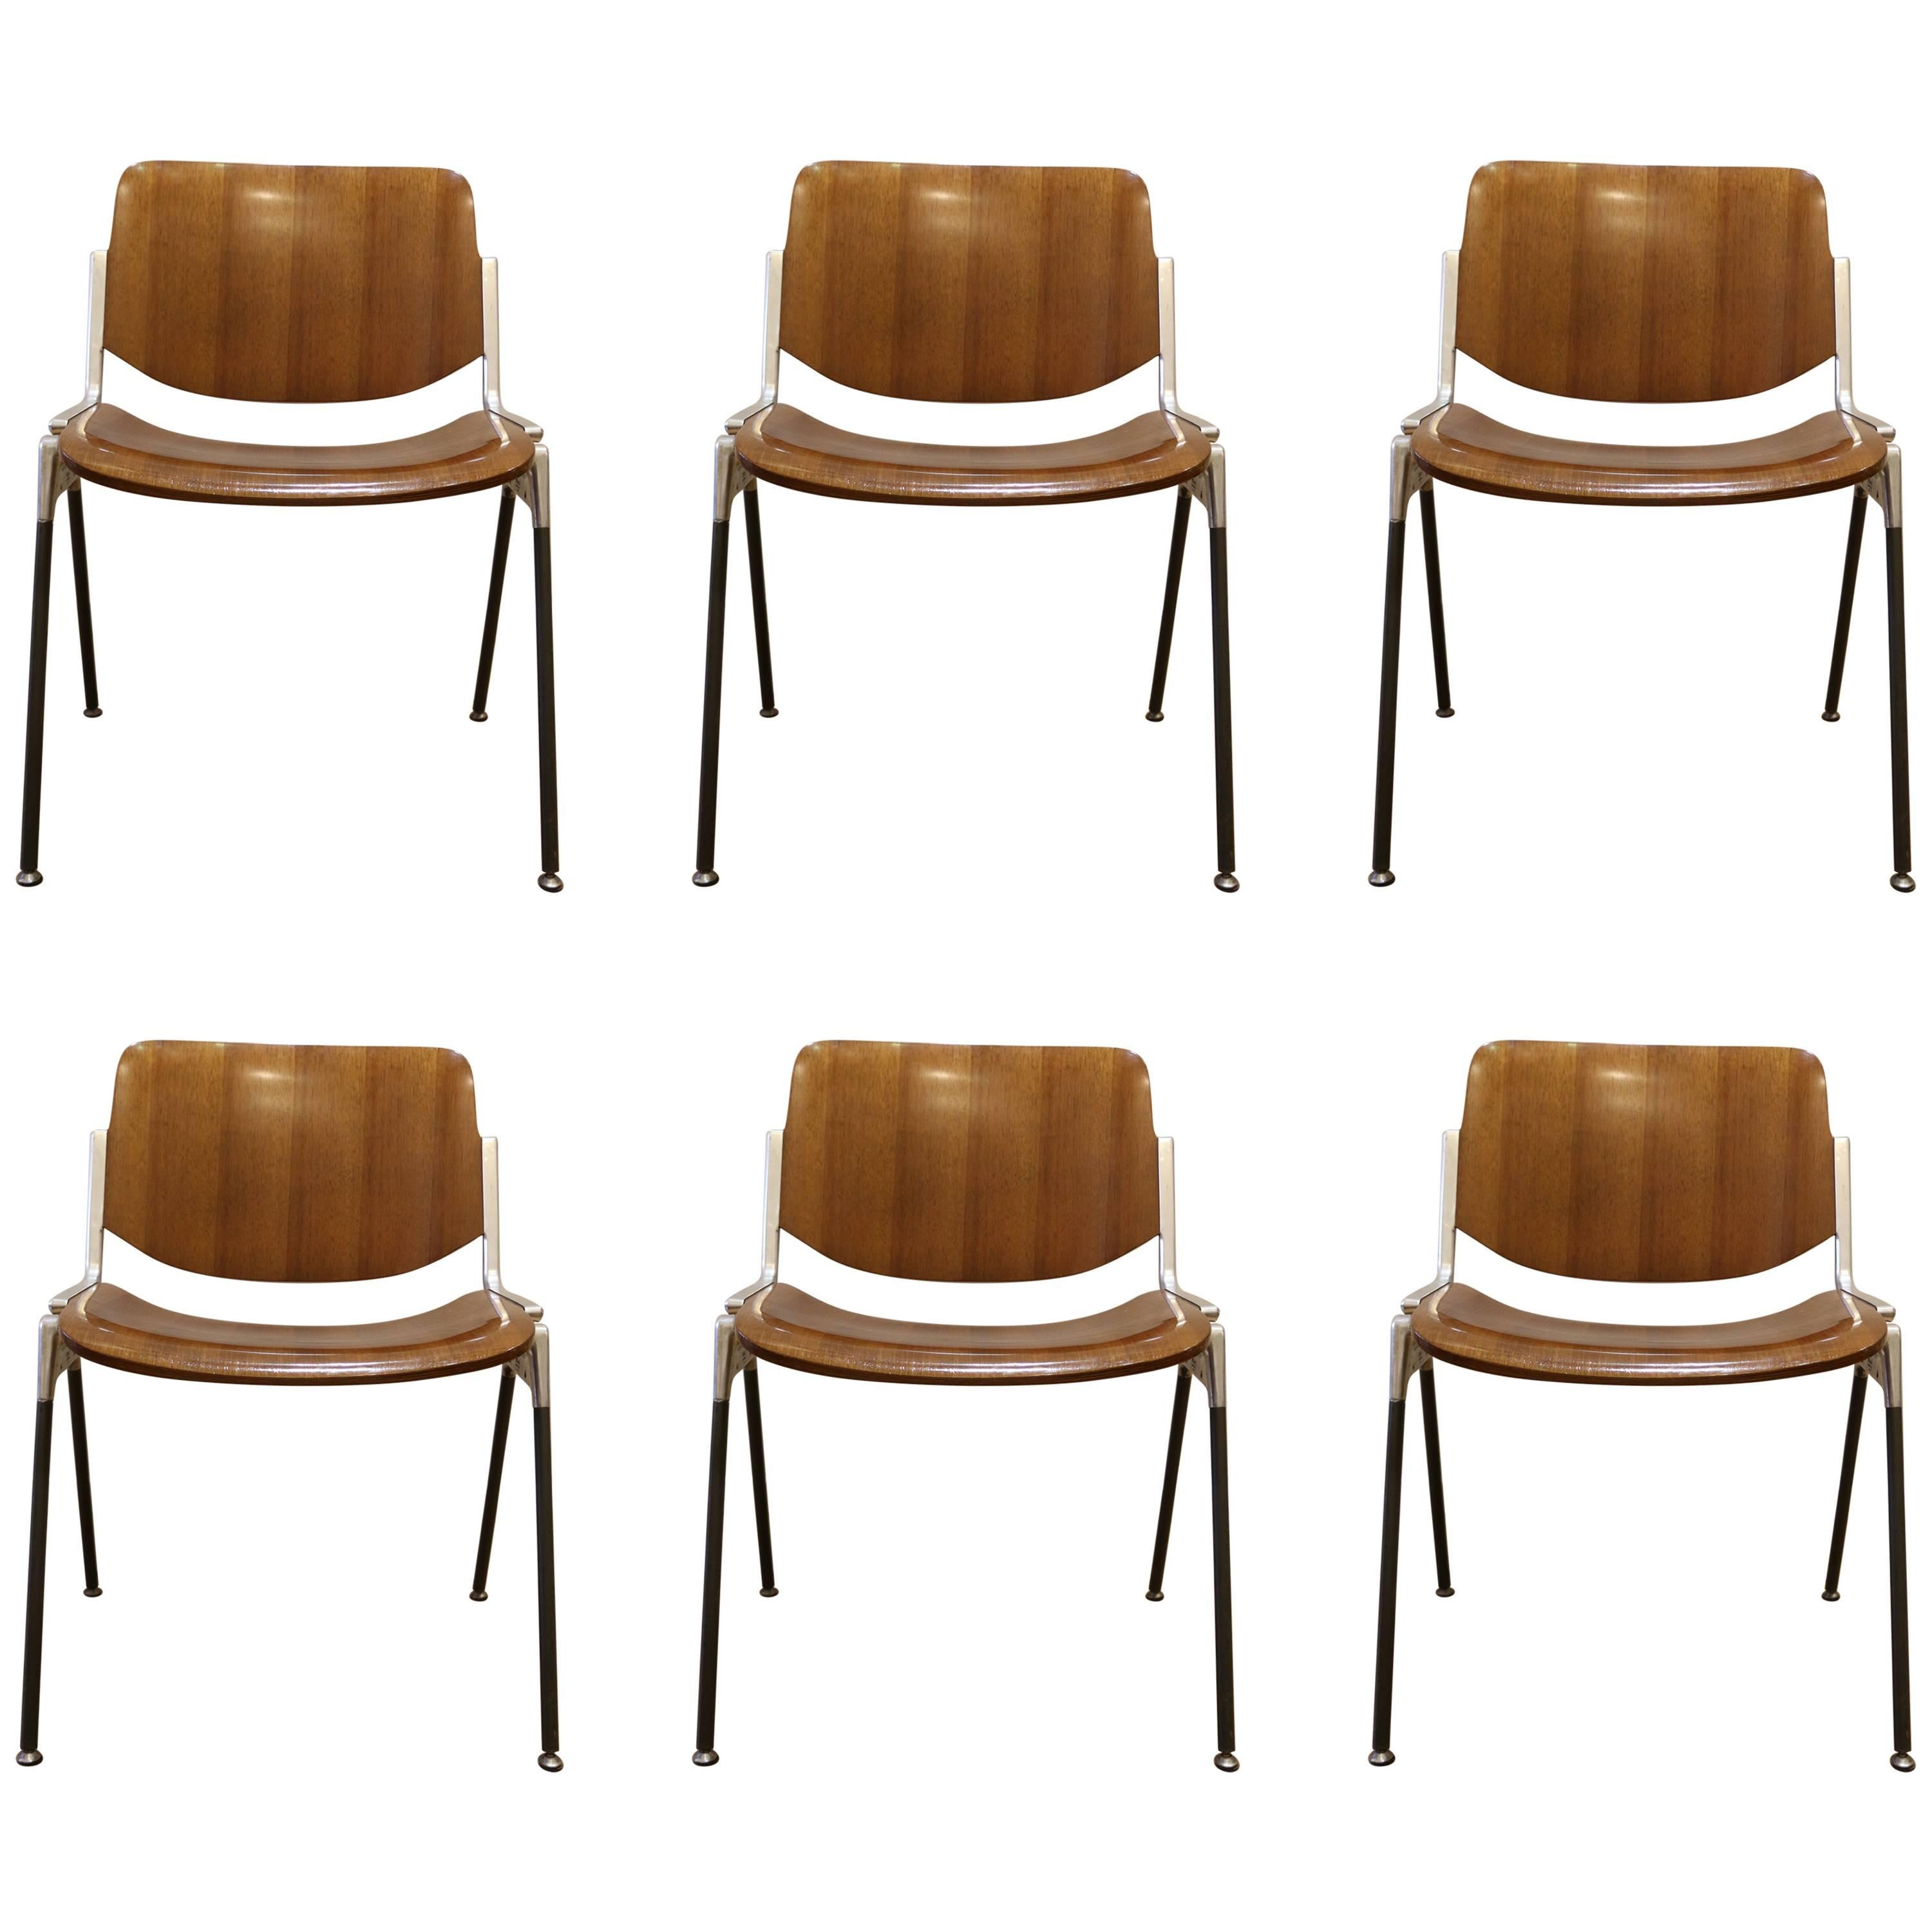 Set of Six Mid-Century Modern Chairs by Giancarlo Piretti, Italy, 1970s